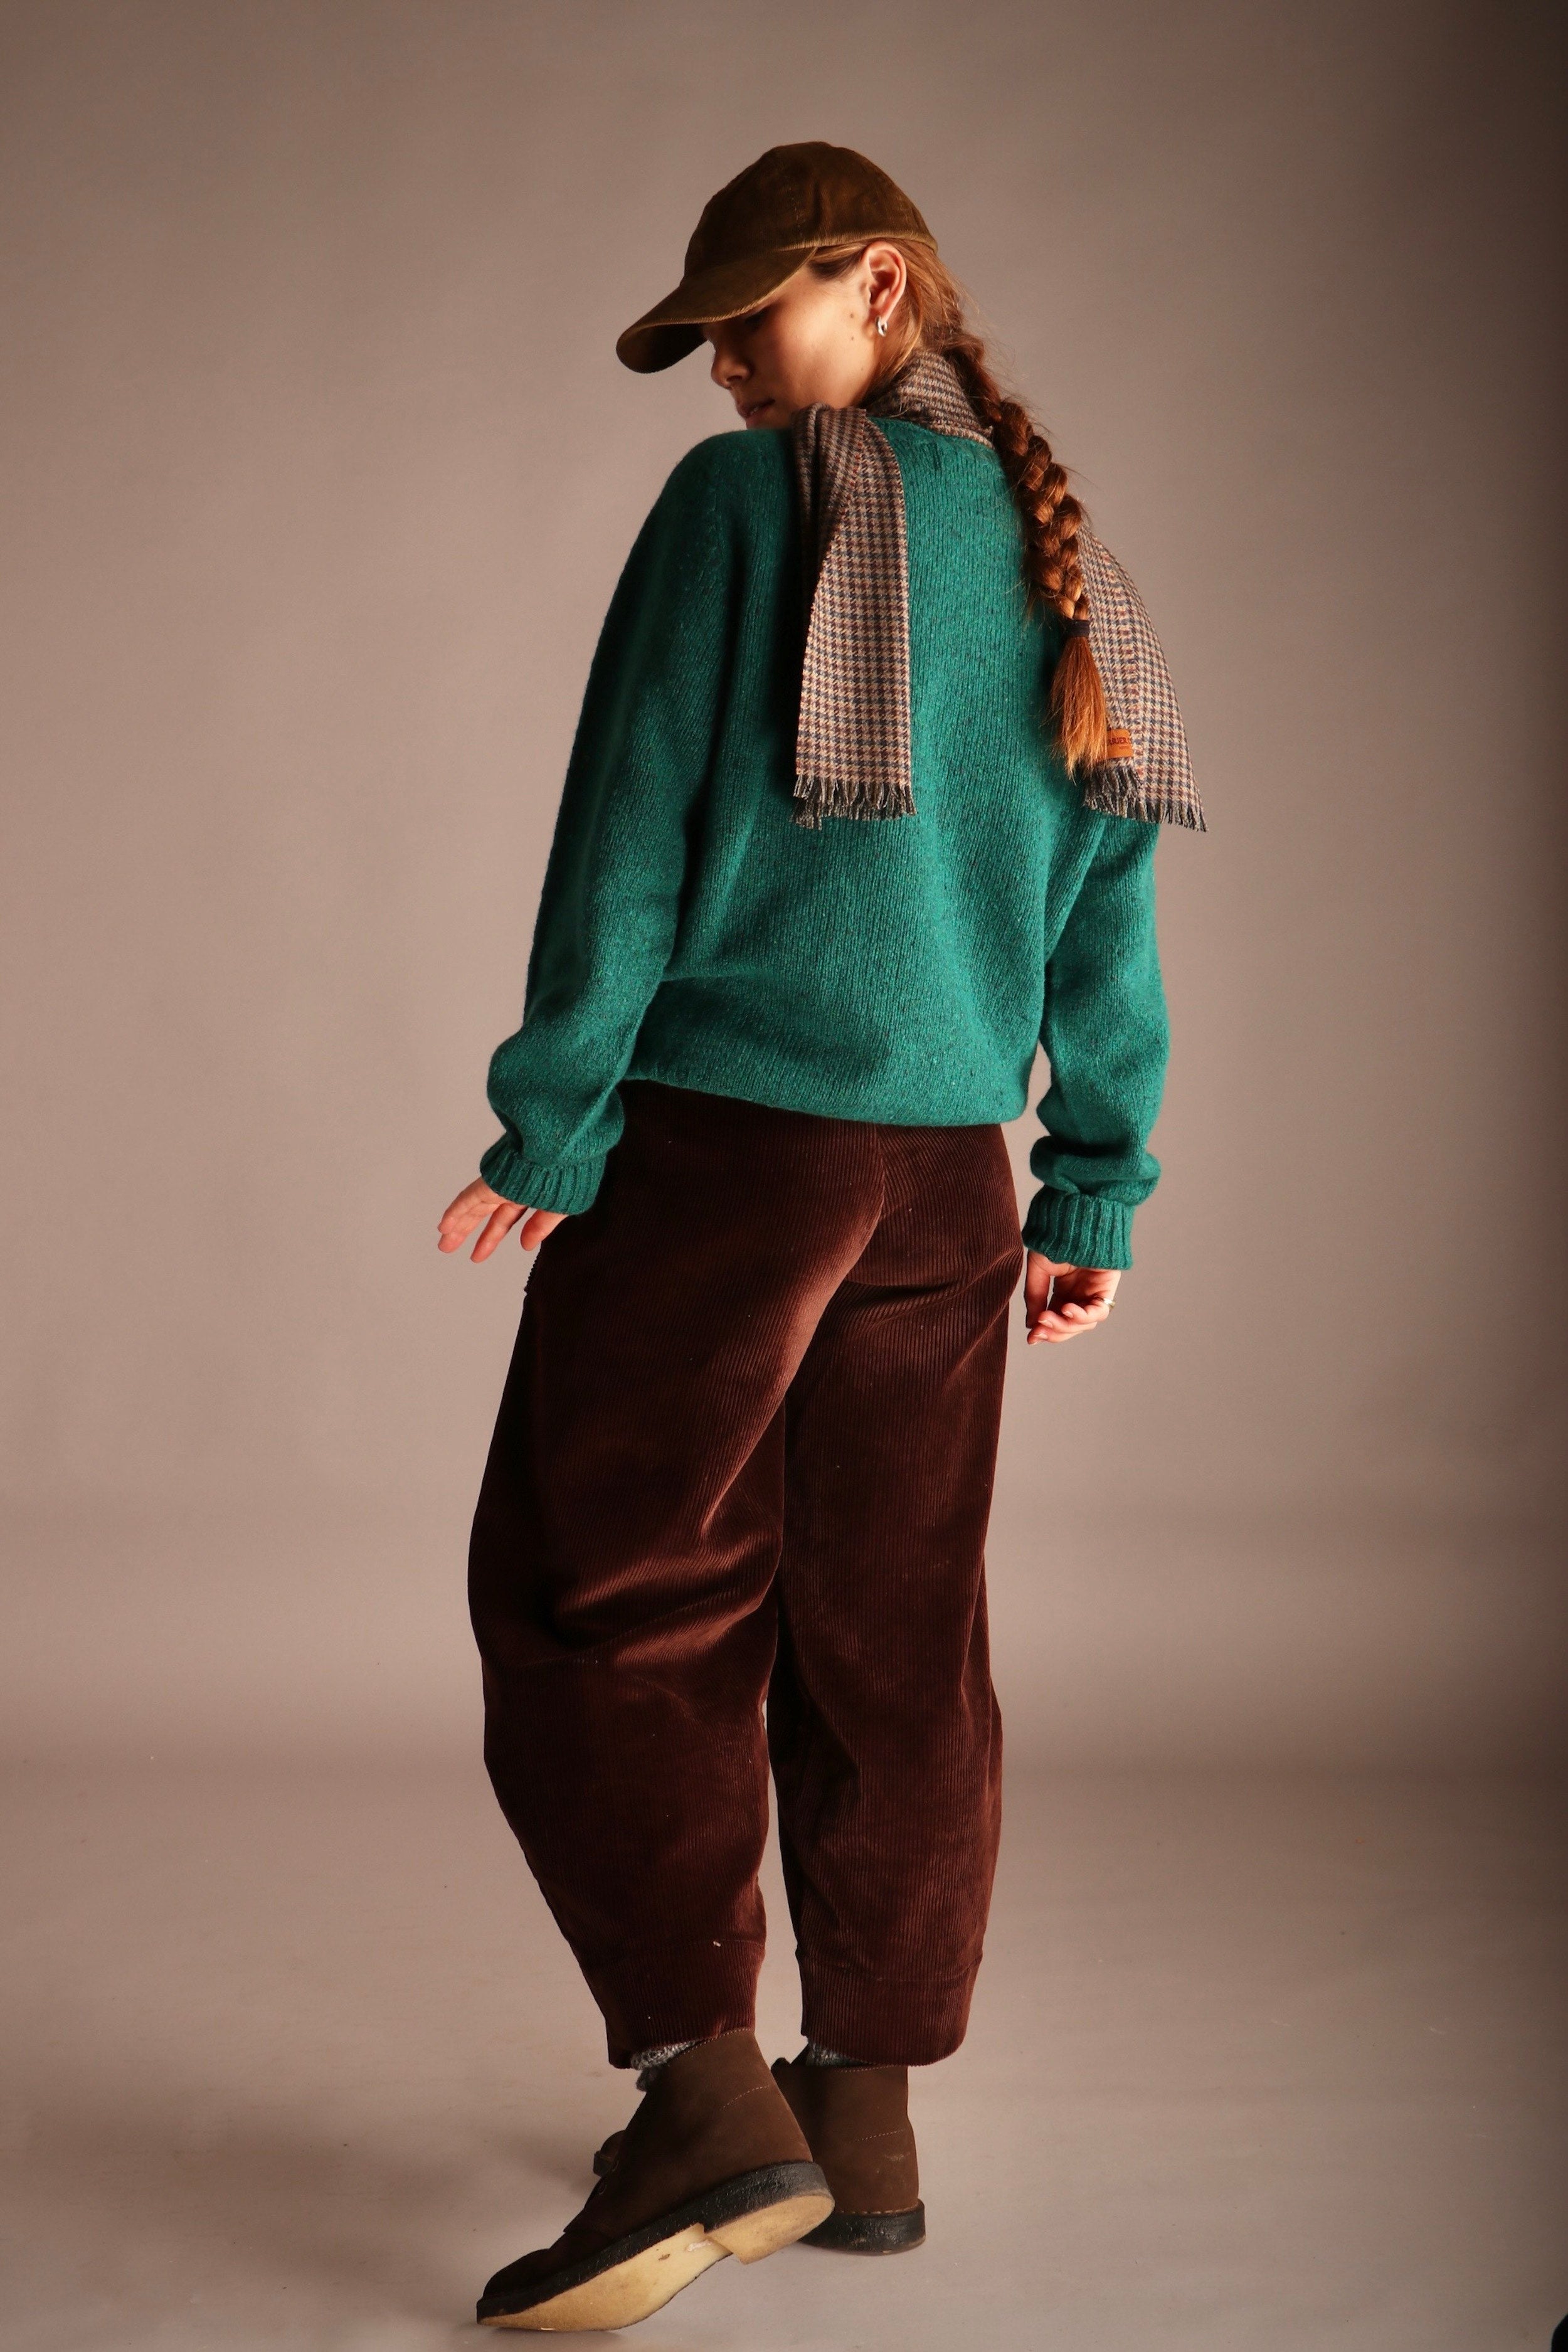 Decca wears Carrier Company Shetland Lambswool Jumper in Dragon with Dutch Trouser in Corduro, Corduroy Cap and Short Cashmere Scarf